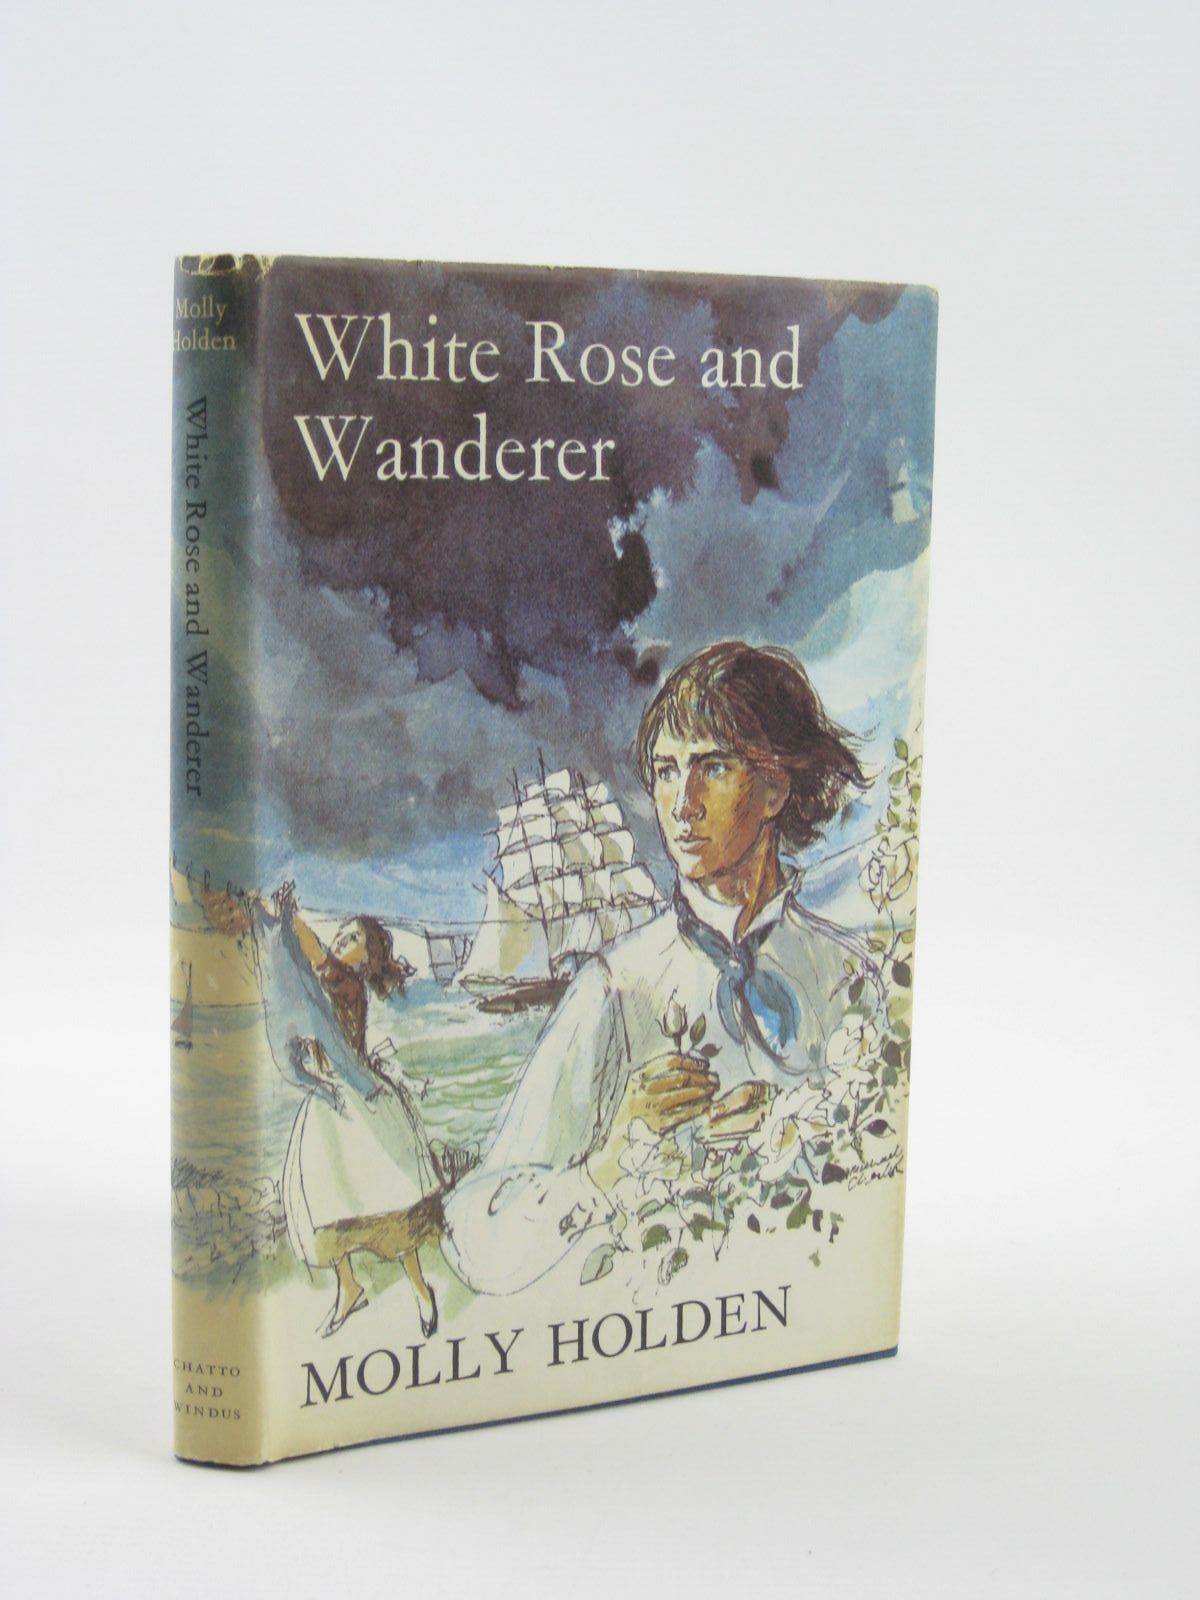 Cover of WHITE ROSE AND WANDERER by Molly Holden